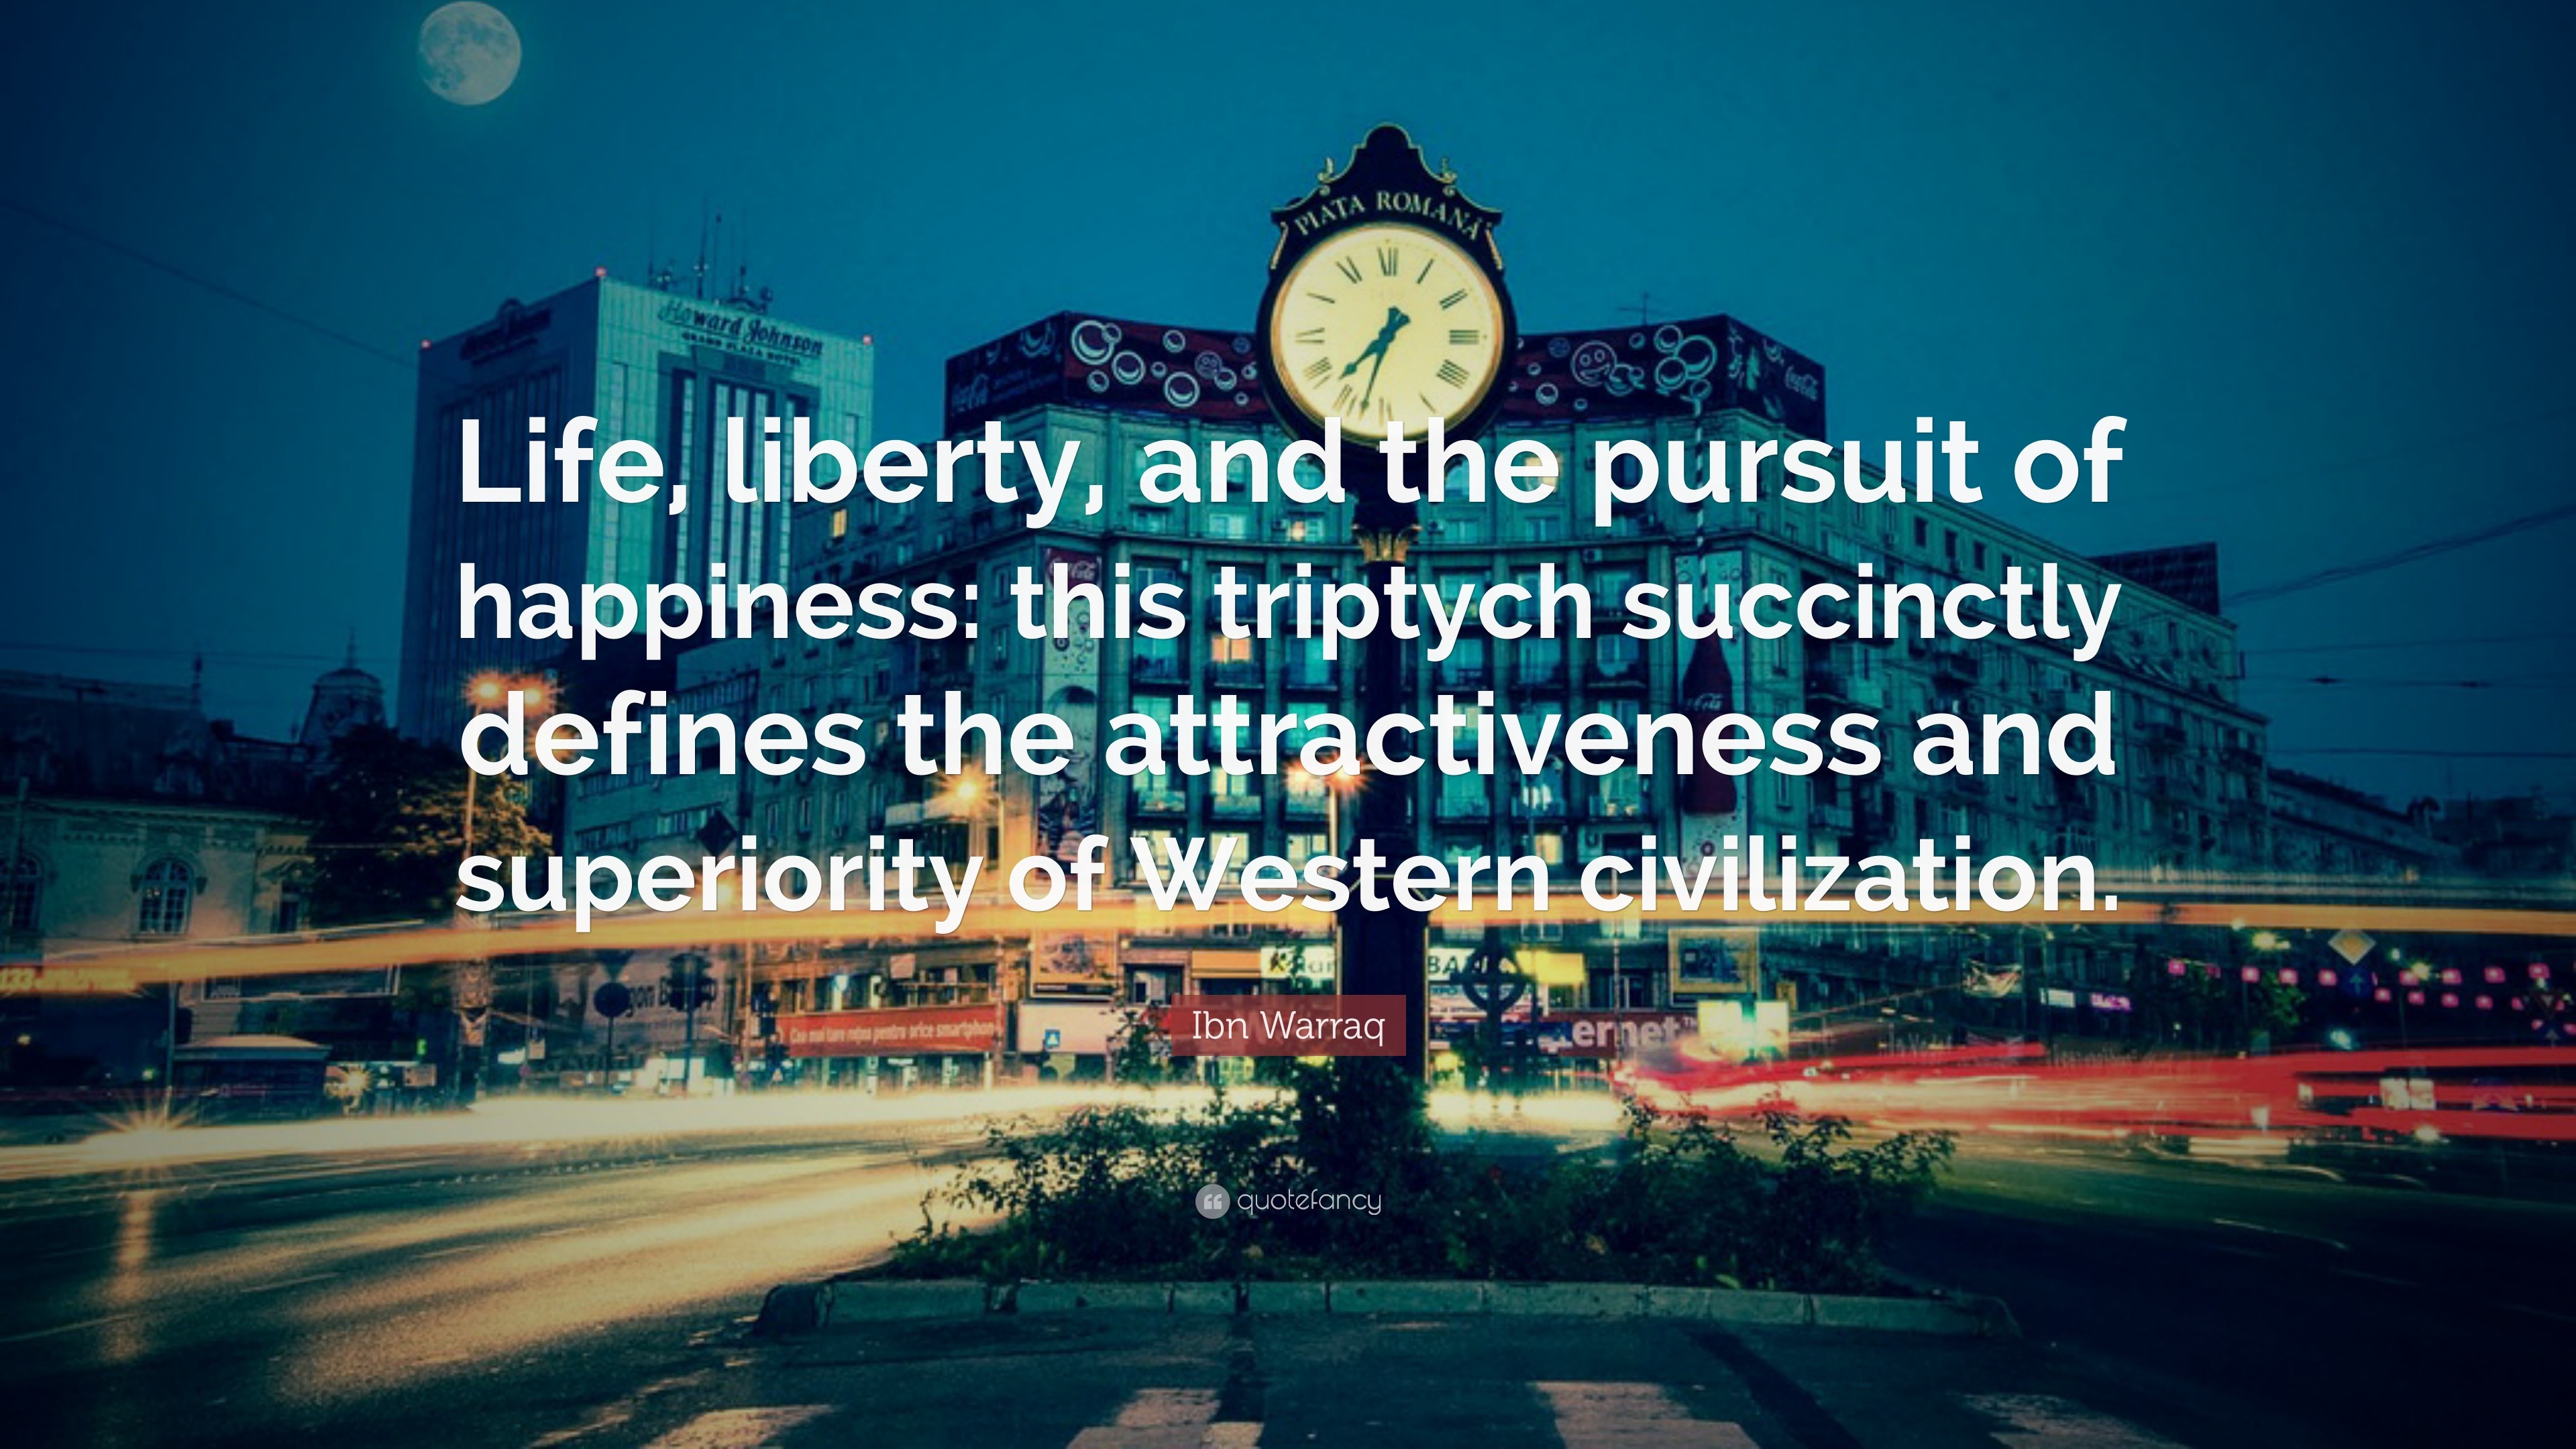 Ibn Warraq Quote “Life liberty and the pursuit of happiness this